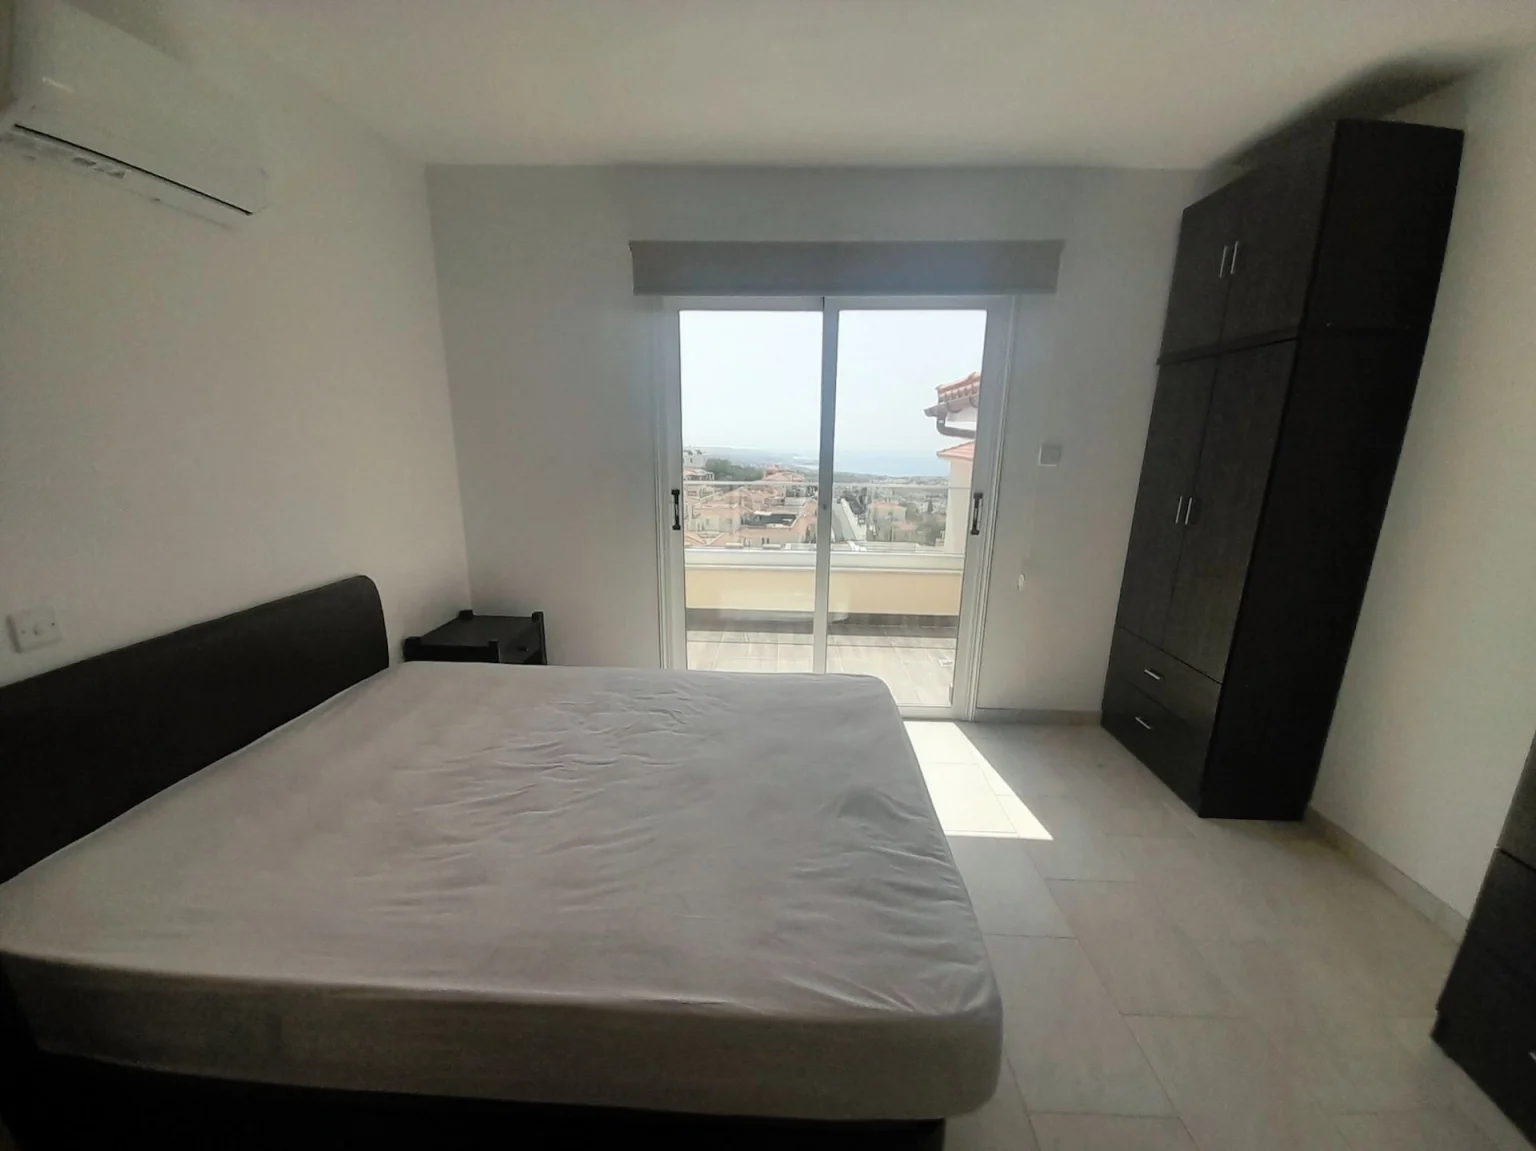 2 Bedroom House for Rent in Peyia, Paphos District